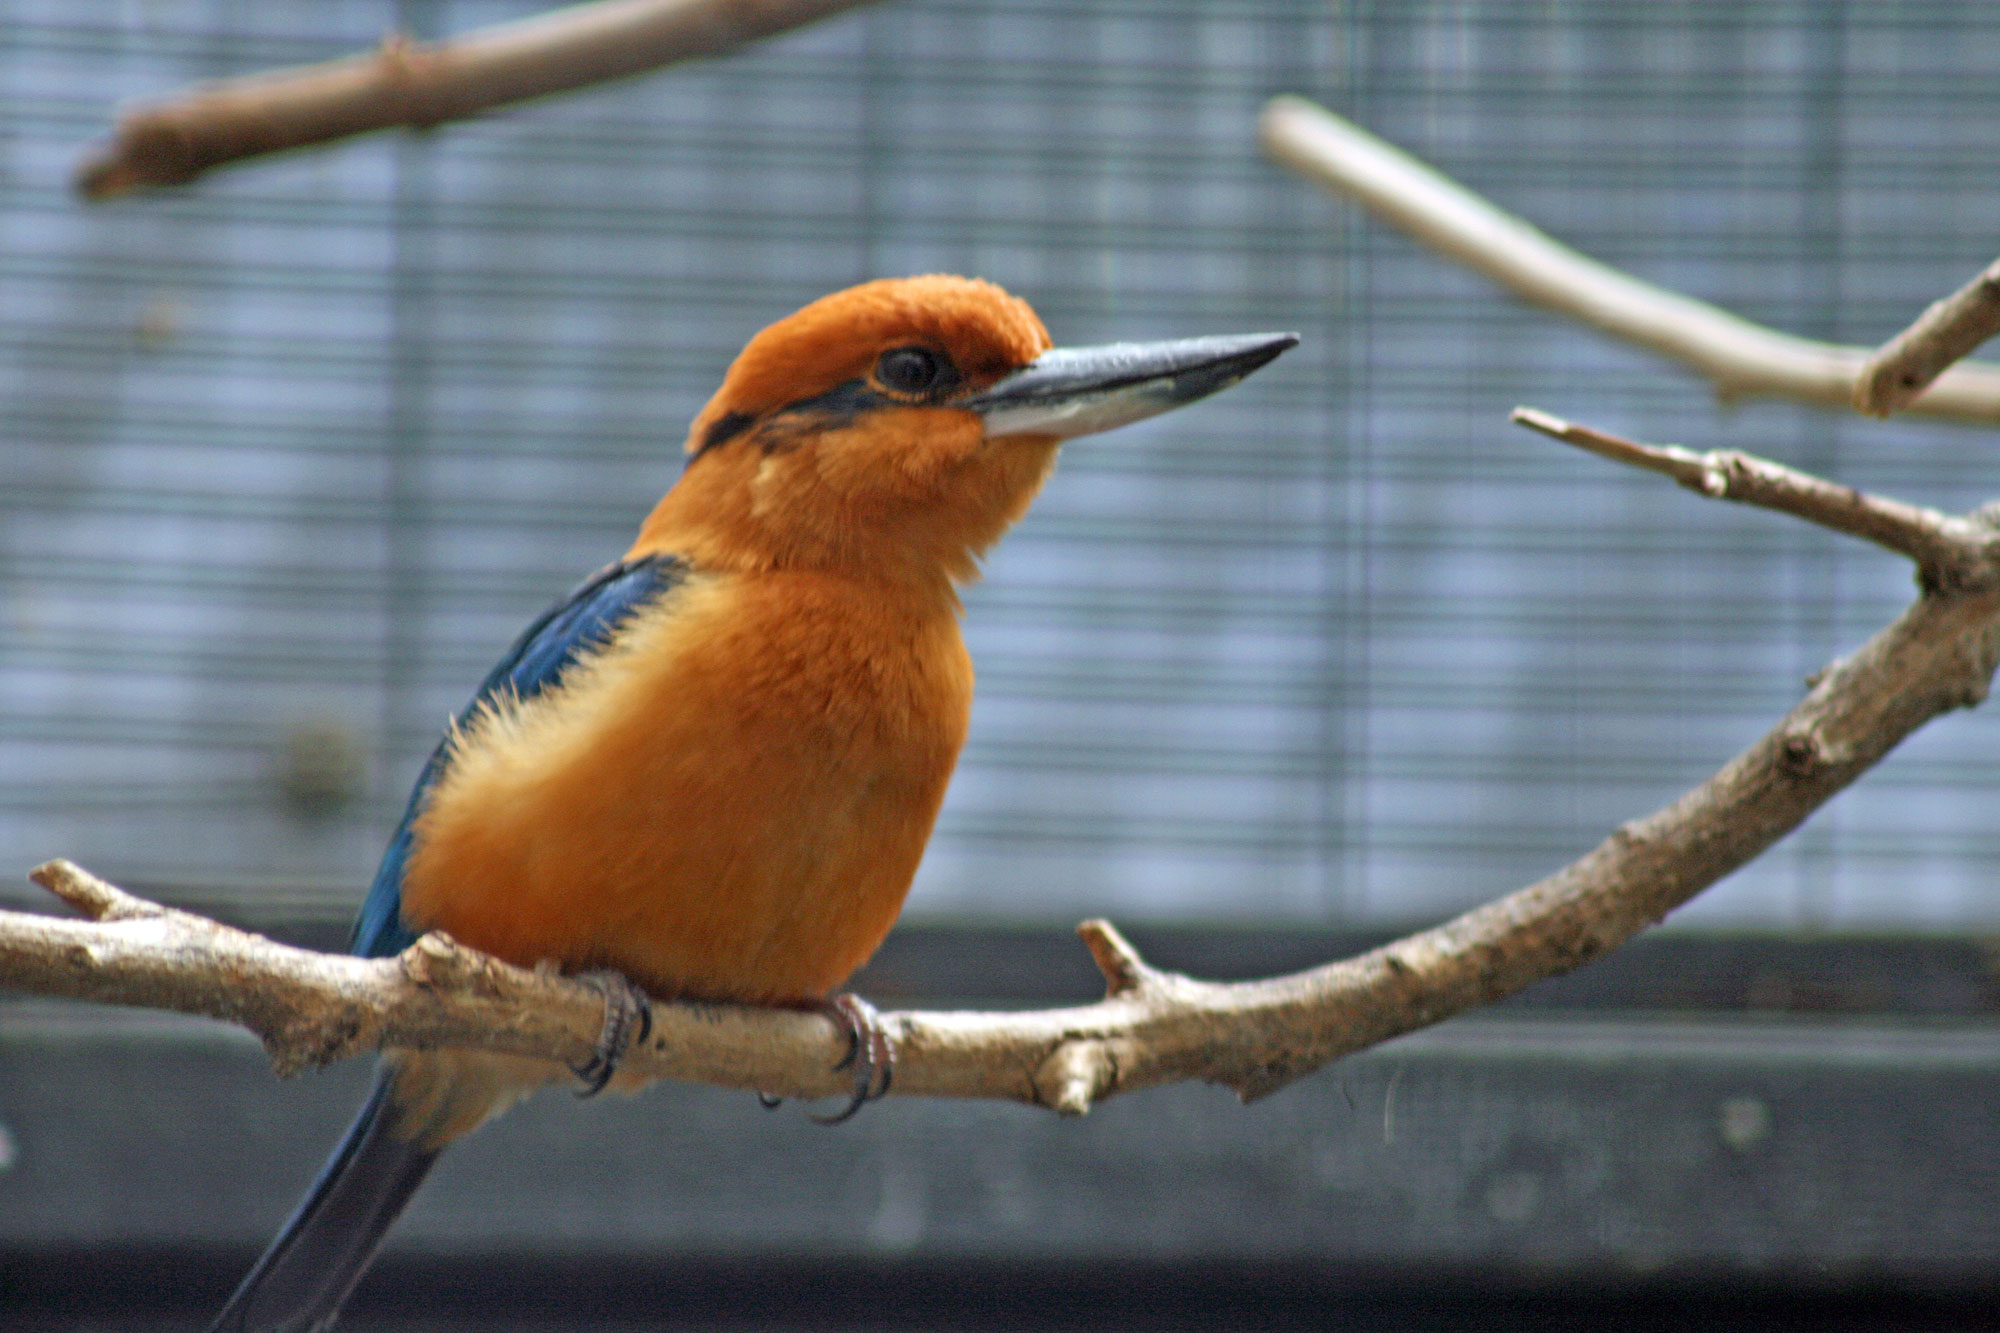 A captive Guam kingfisher perched on a branch. The kingfisher is a bird with a large head, a large black and white beak, a black eye, a mostly orange head and breast, and a blue back.